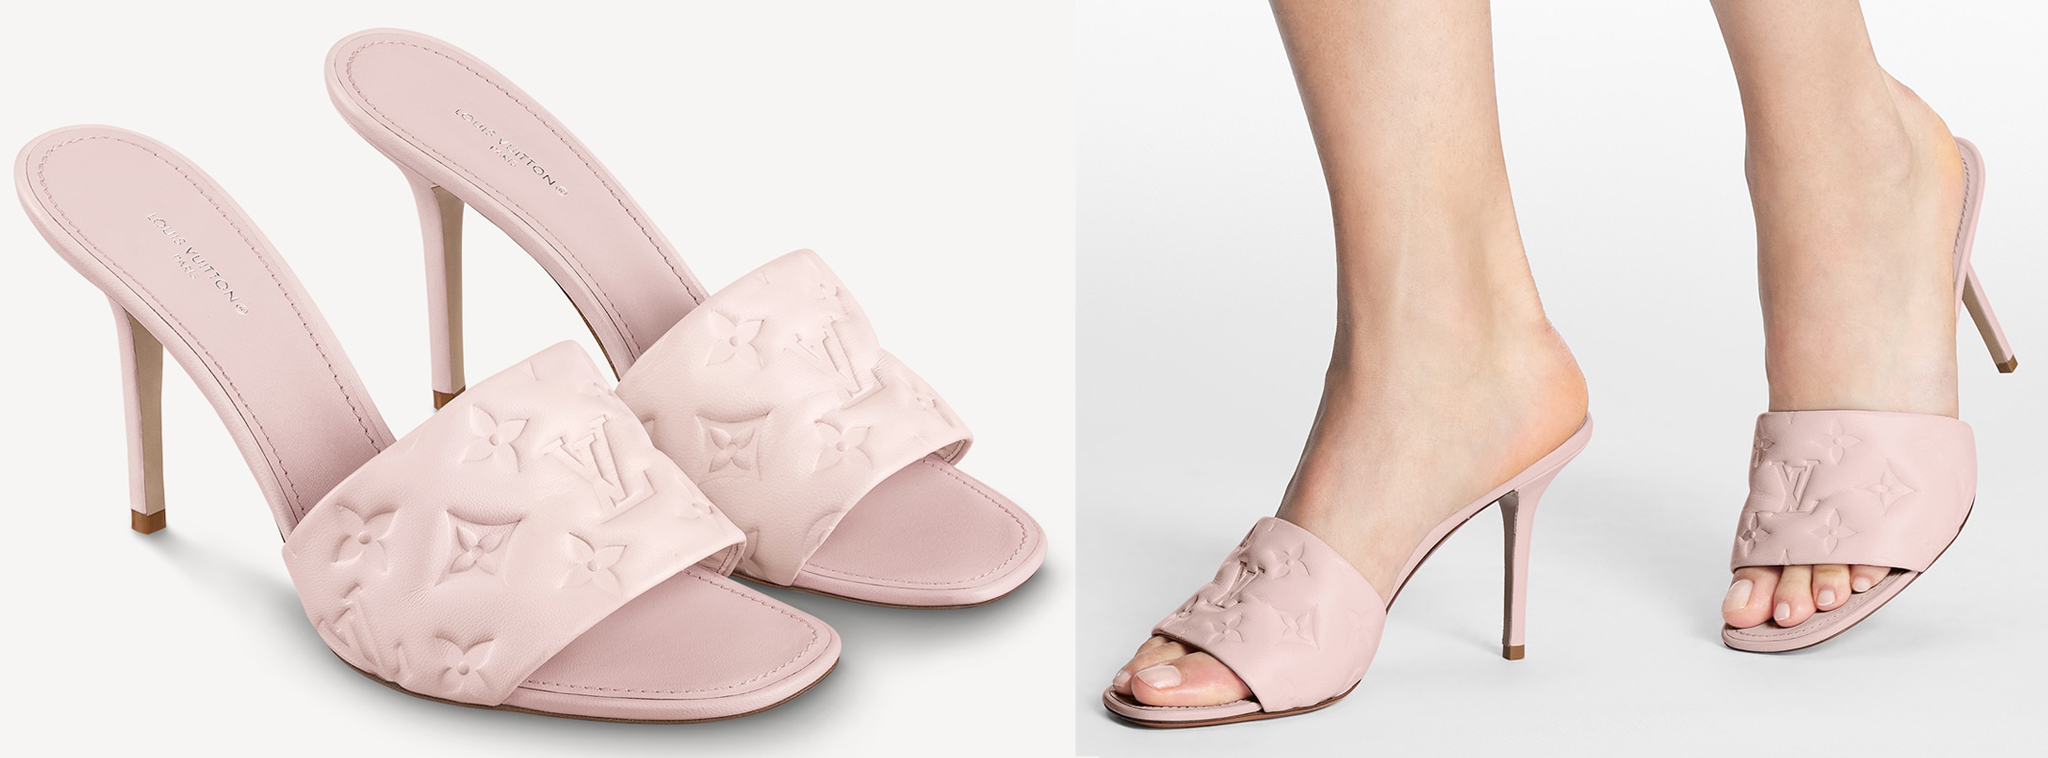 The Revival mules are crafted from soft lambskin leather embossed with Louis Vuitton's signature monogram pattern